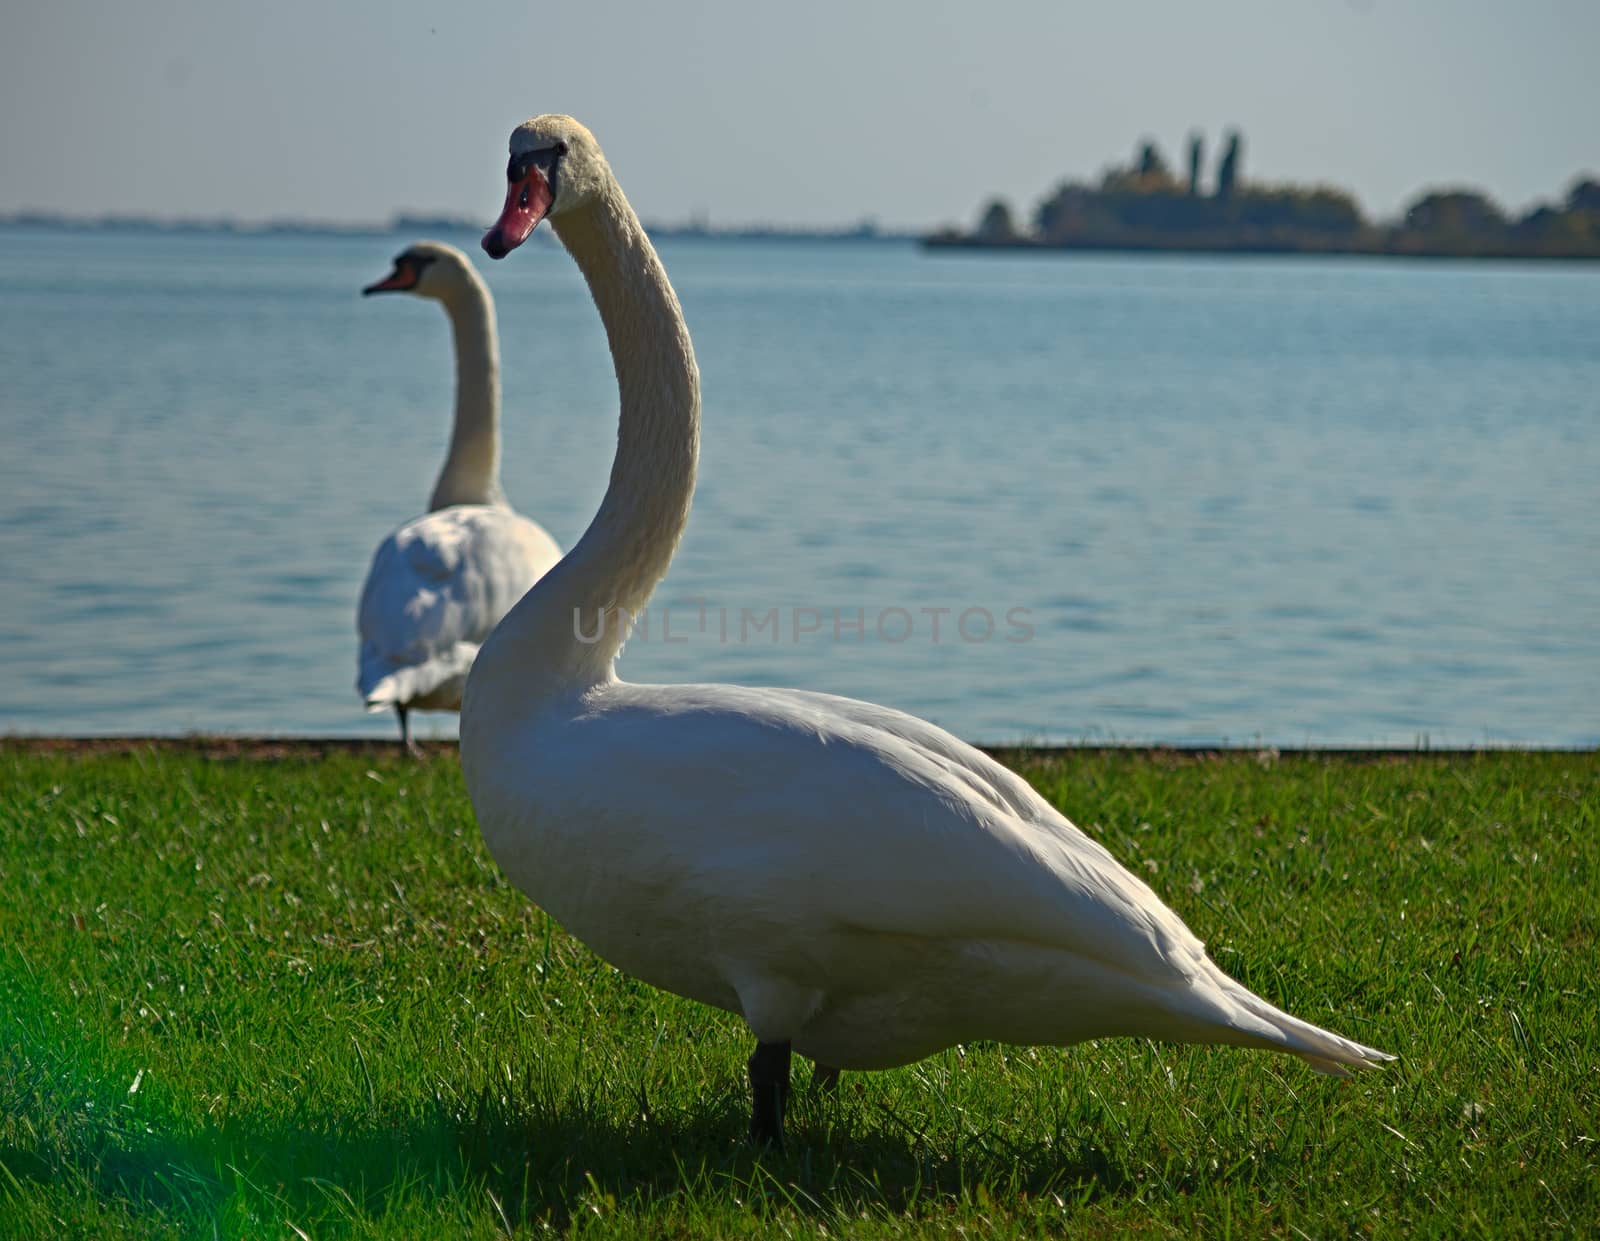 White swan standing on grass field with lake in background